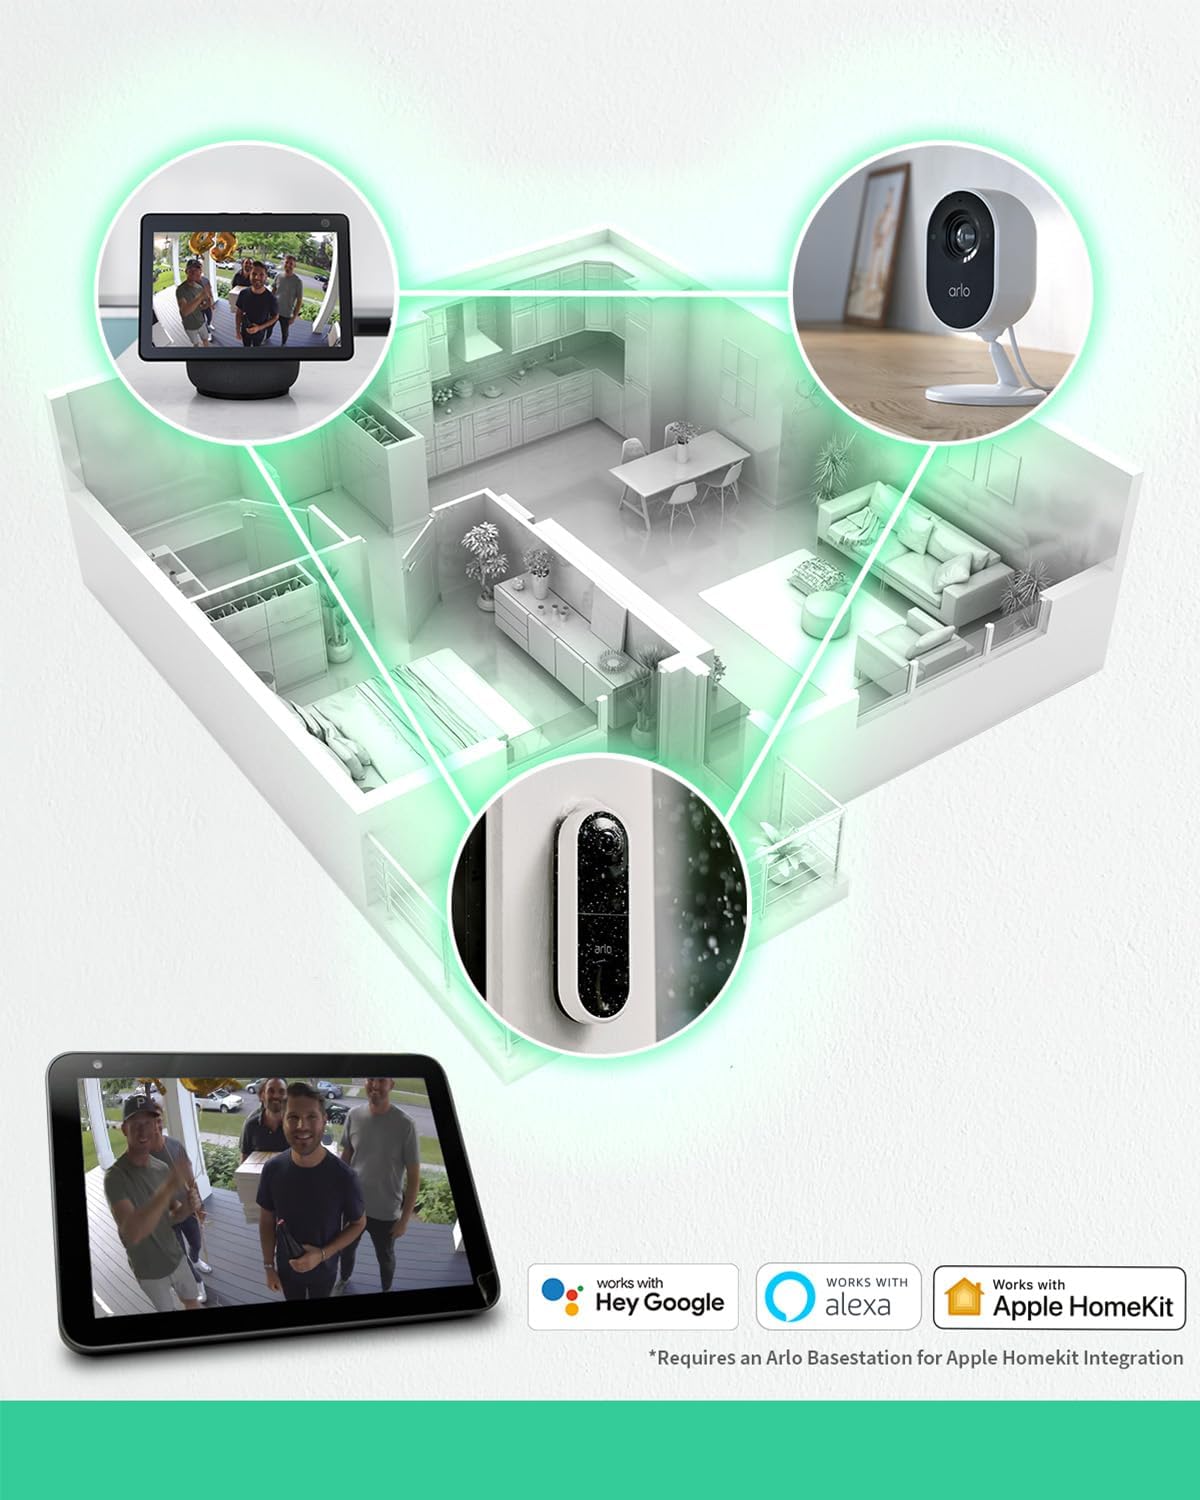 This image appears to be an advertising graphic for a smart home security system. The central focus is a cutaway illustration of a home with various rooms, where different security cameras and smart devices are in use. Here's what we can see:
1. A smart display on the upper left showing two people having a conversation outside.
2. A smart indoor security camera is featured on the upper right, suggesting it is monitoring the living area.
3. A smart doorbell camera on the right side is capturing and possibly streaming video of two people standing at the doorstep.
4. A tablet at the bottom of the image is displaying the view from the doorbell camera.
5. Around the smart doorbell image, there are logos.